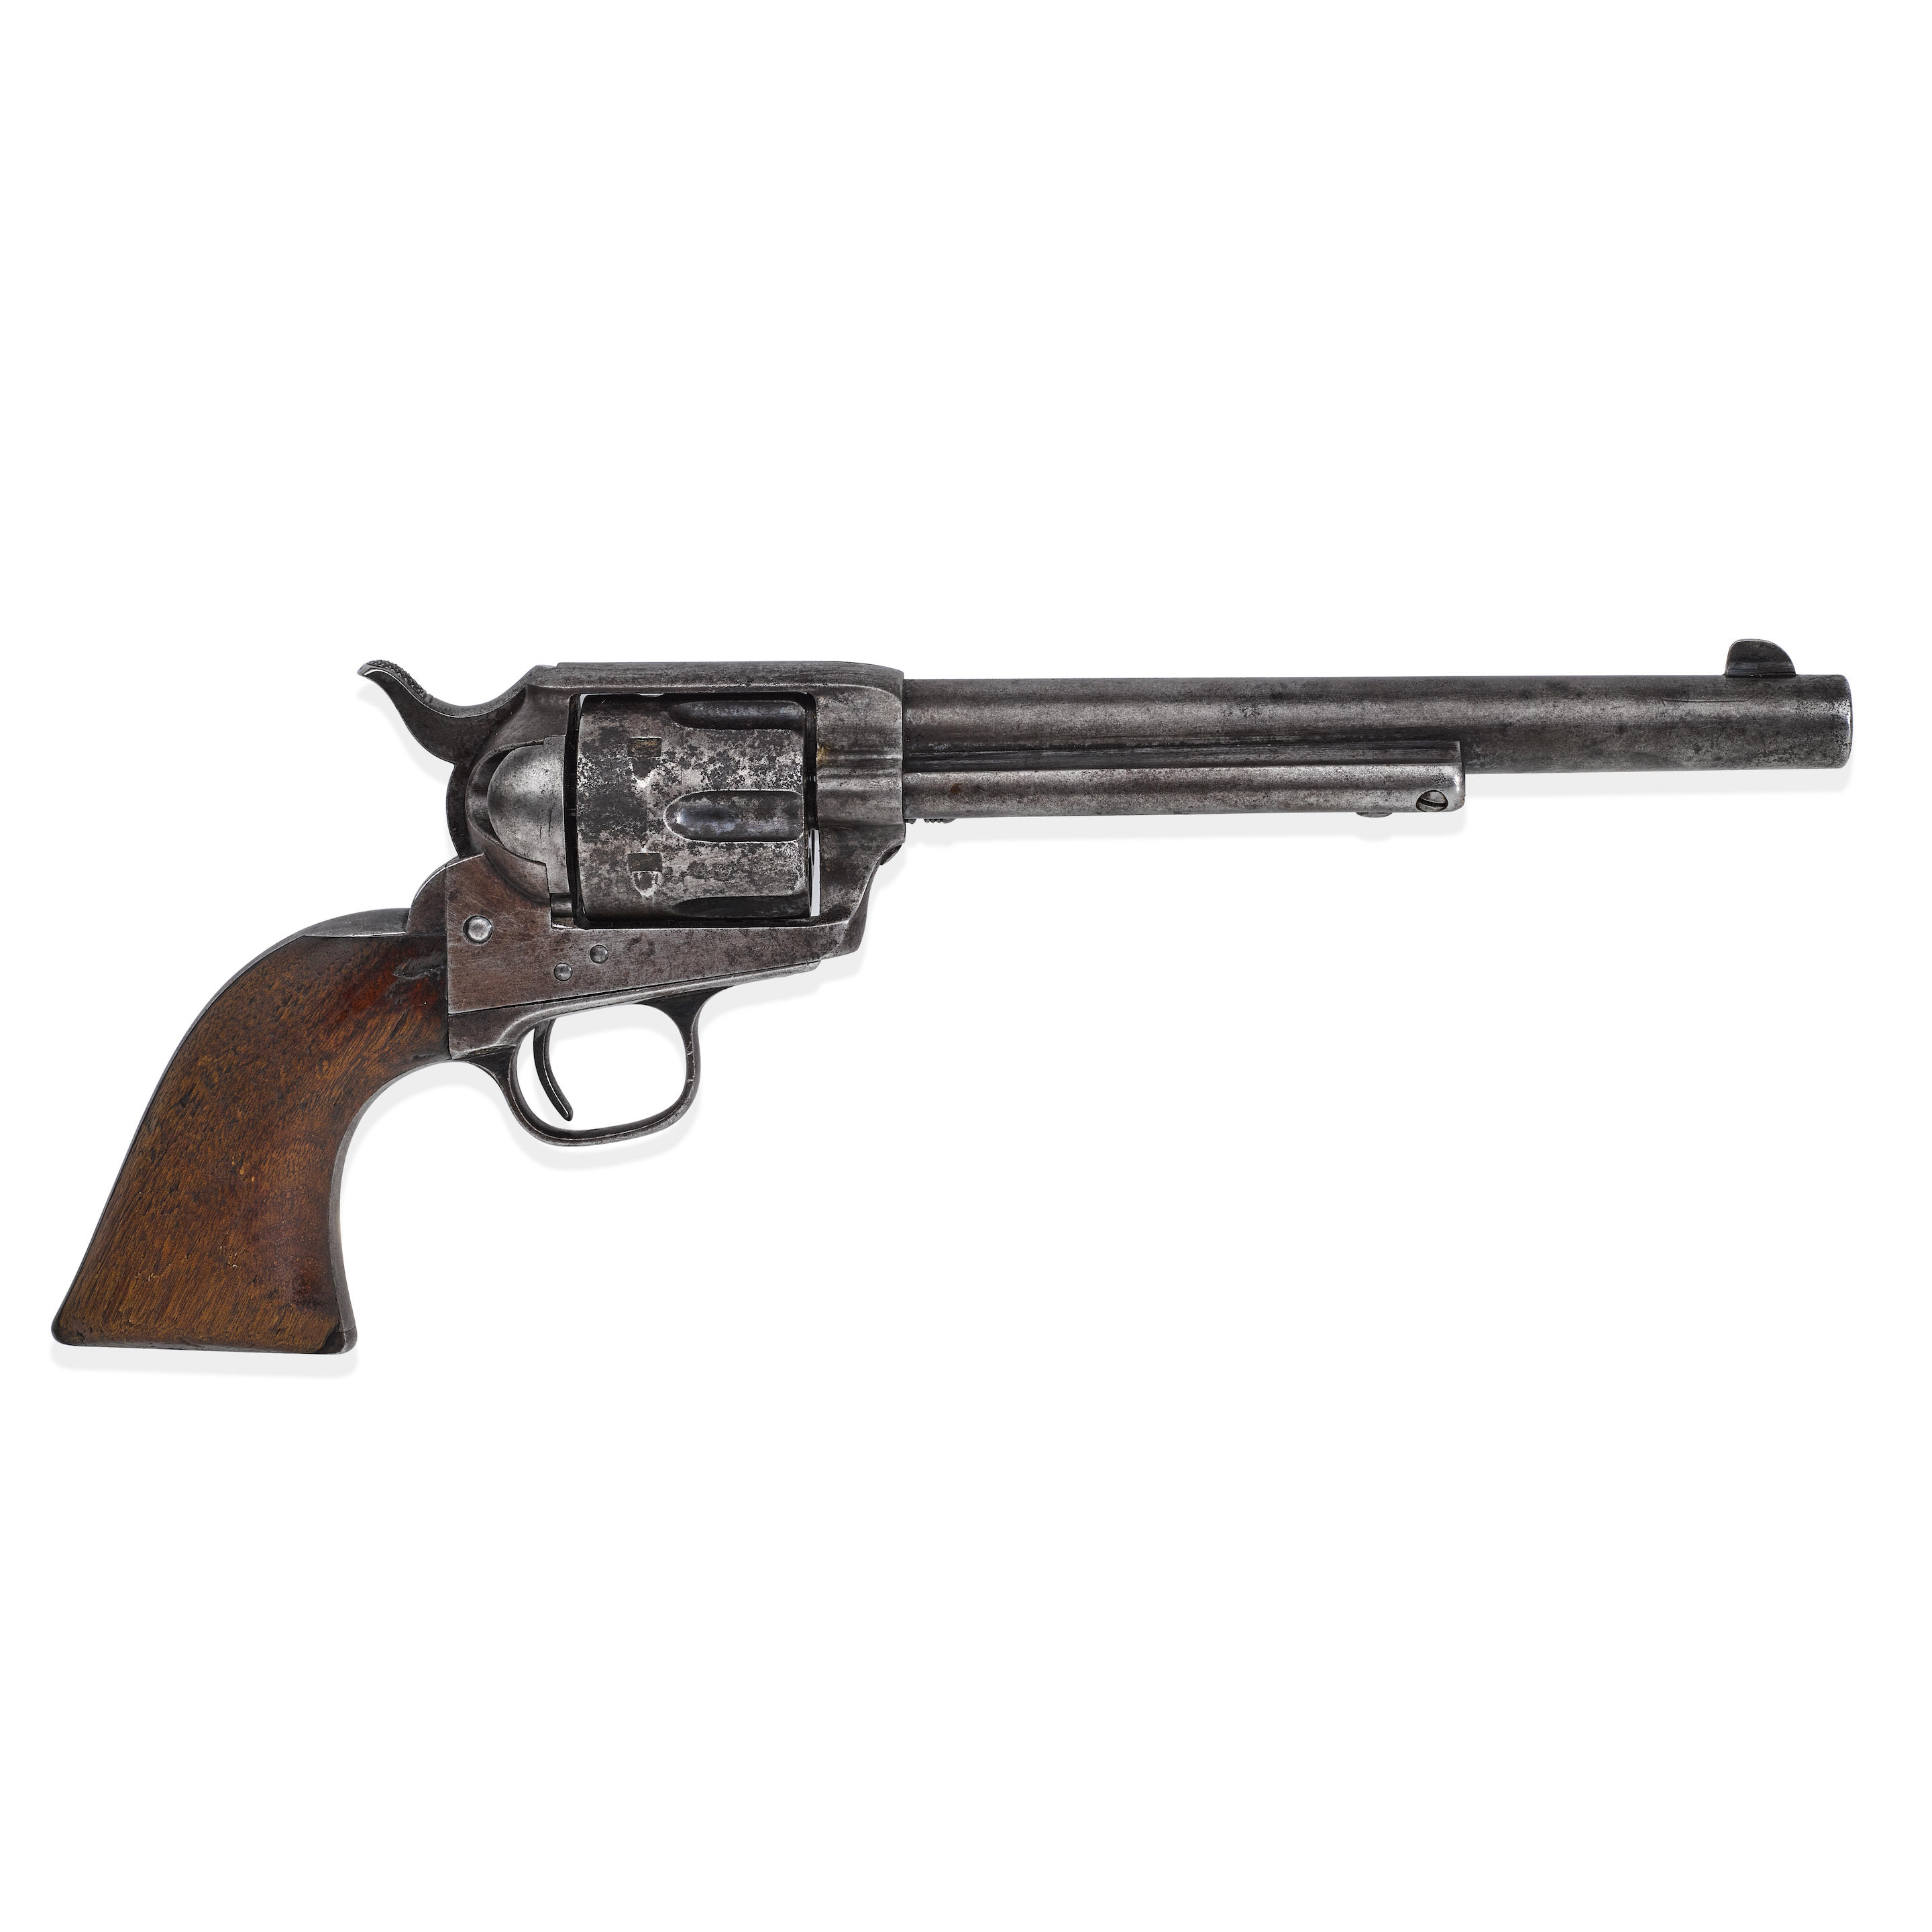 C.1924 Colt Army Special 38 Double Action Revolver sold at auction on 29th  July